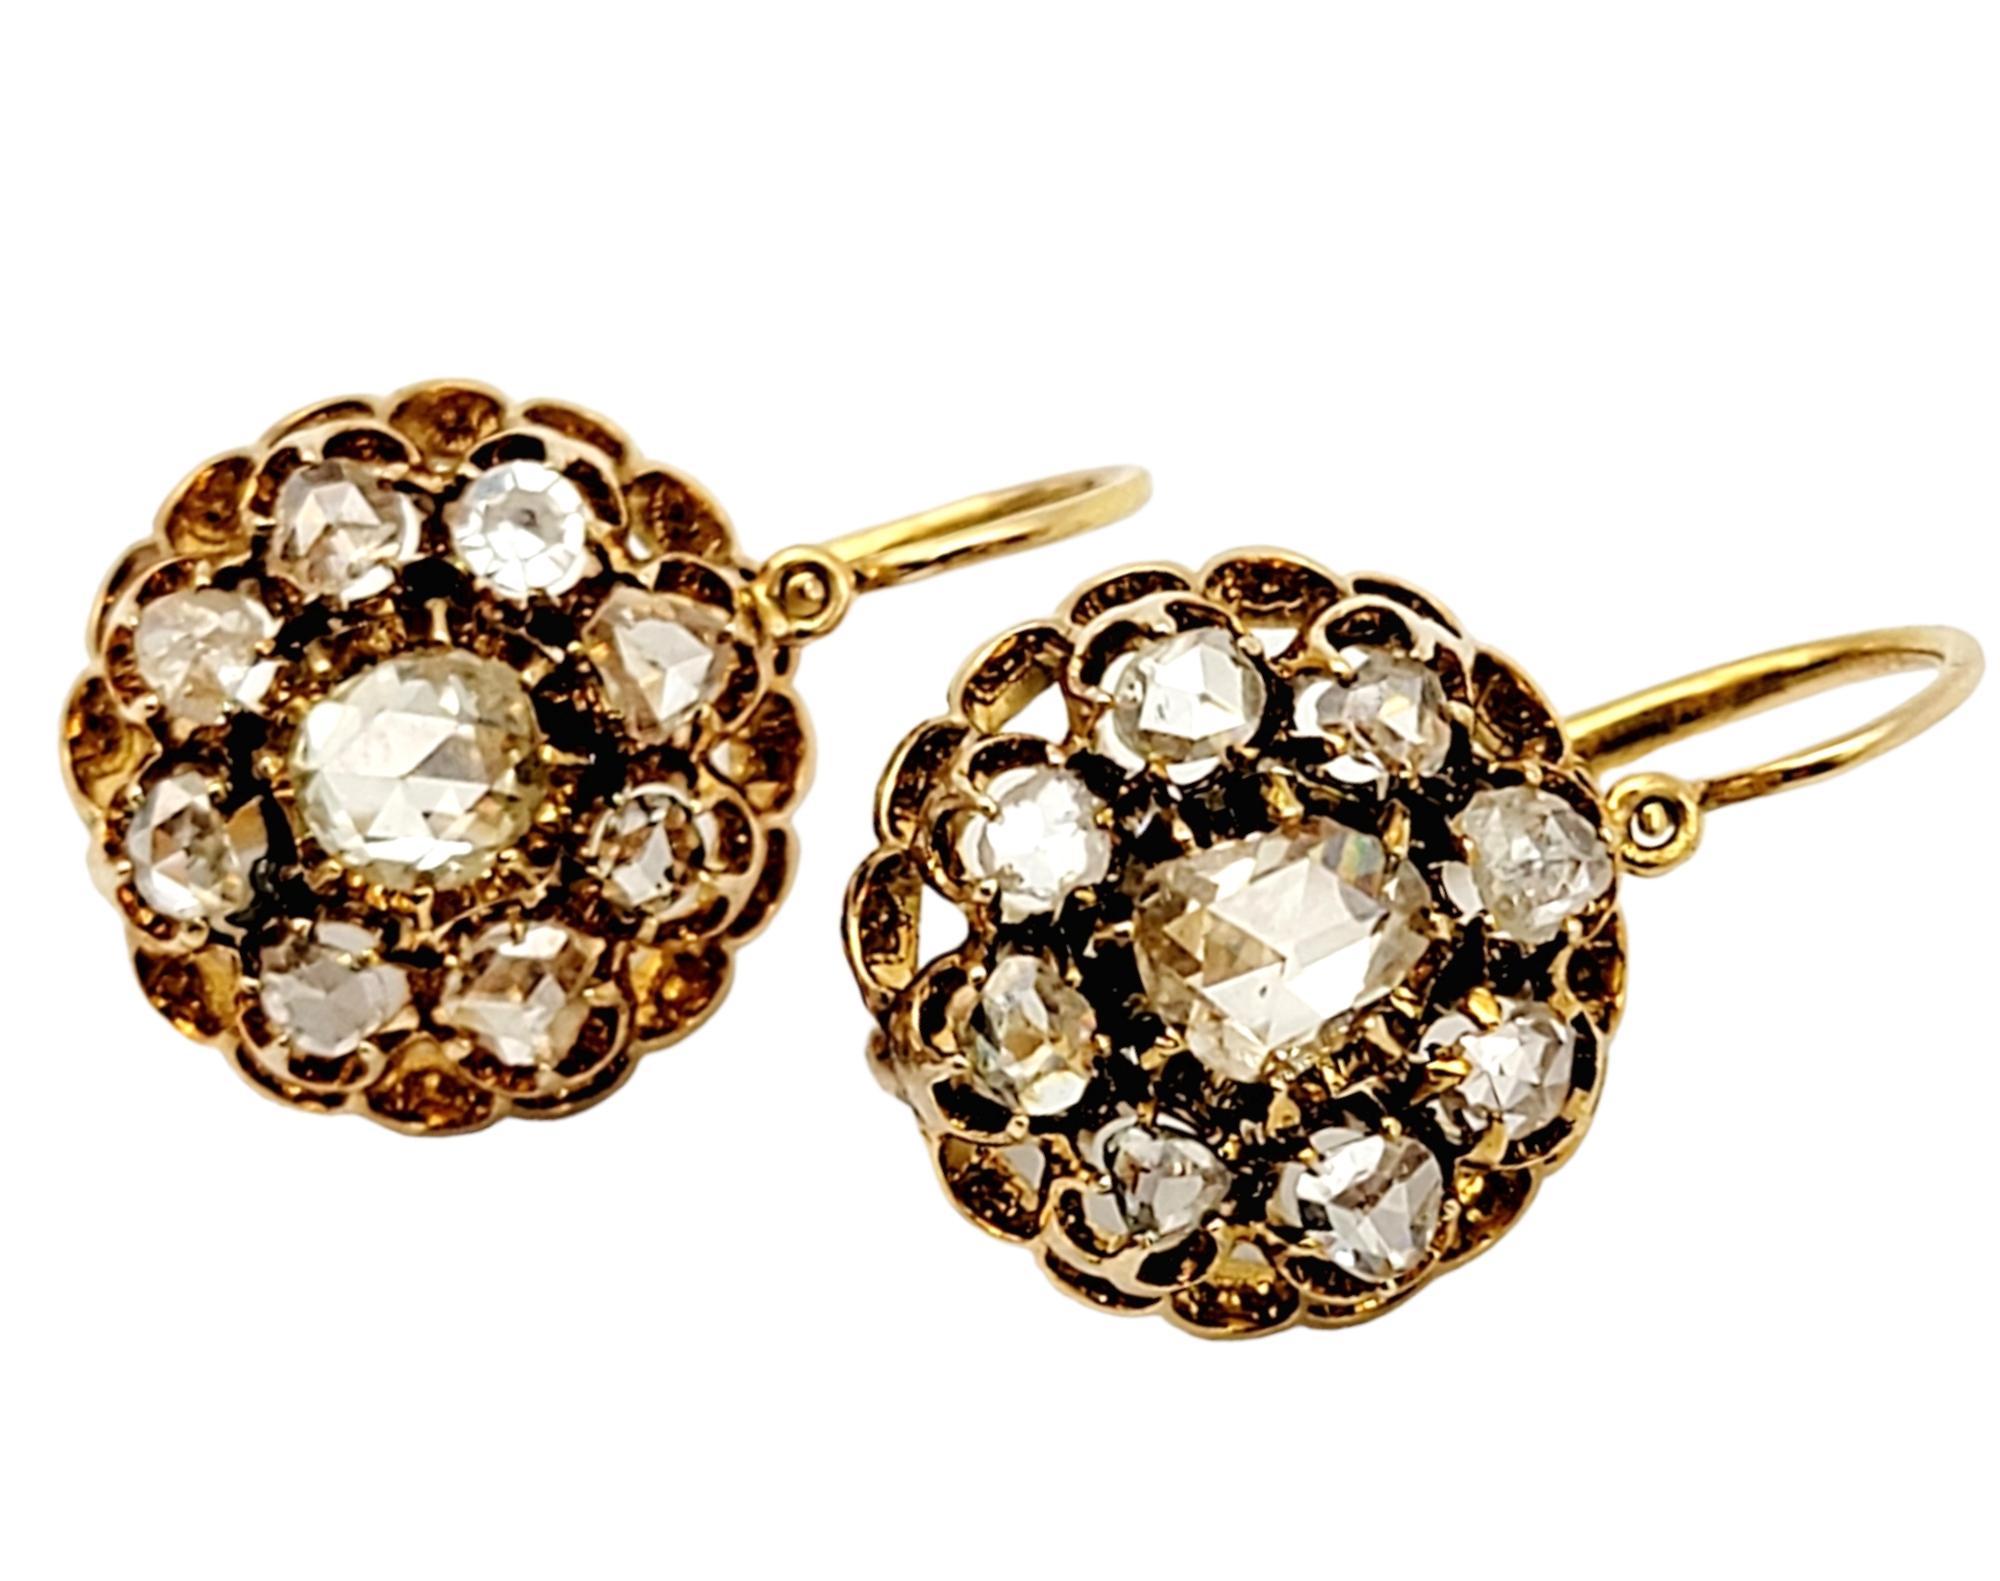 Exquisite vintage rose cut diamond dangle earrings. These simple yet elegant earrings offer the perfect hint of Old World style and sophistication, while giving off all the sparkle you want.

This gorgeous pair of floral motif earrings each feature